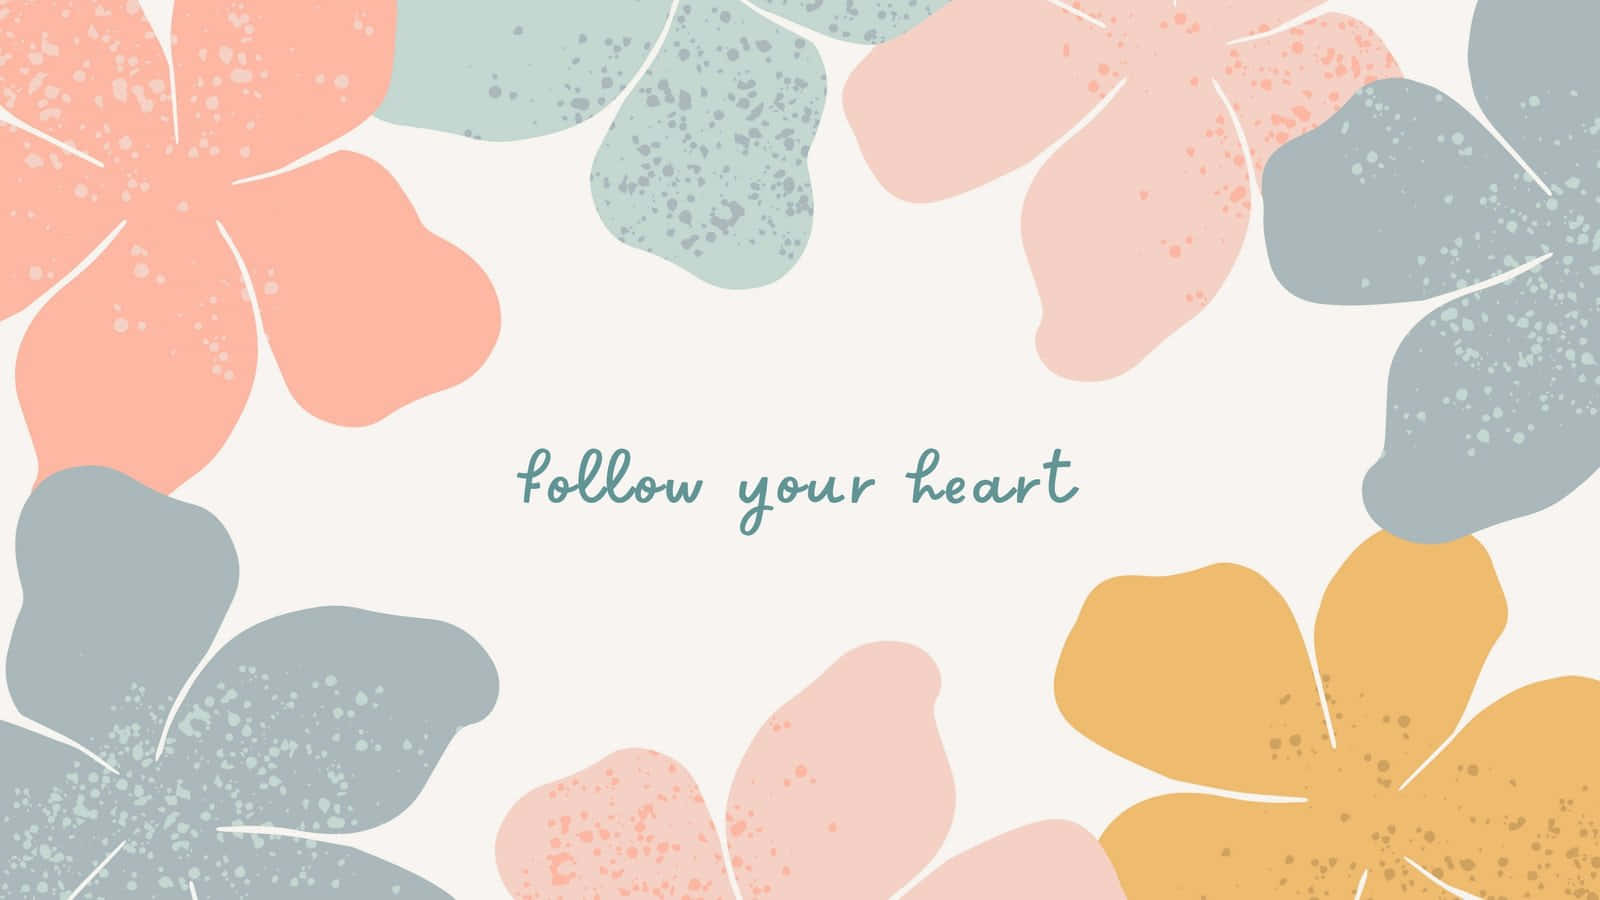 Follow Your Heart - Floral Background Wallpaper